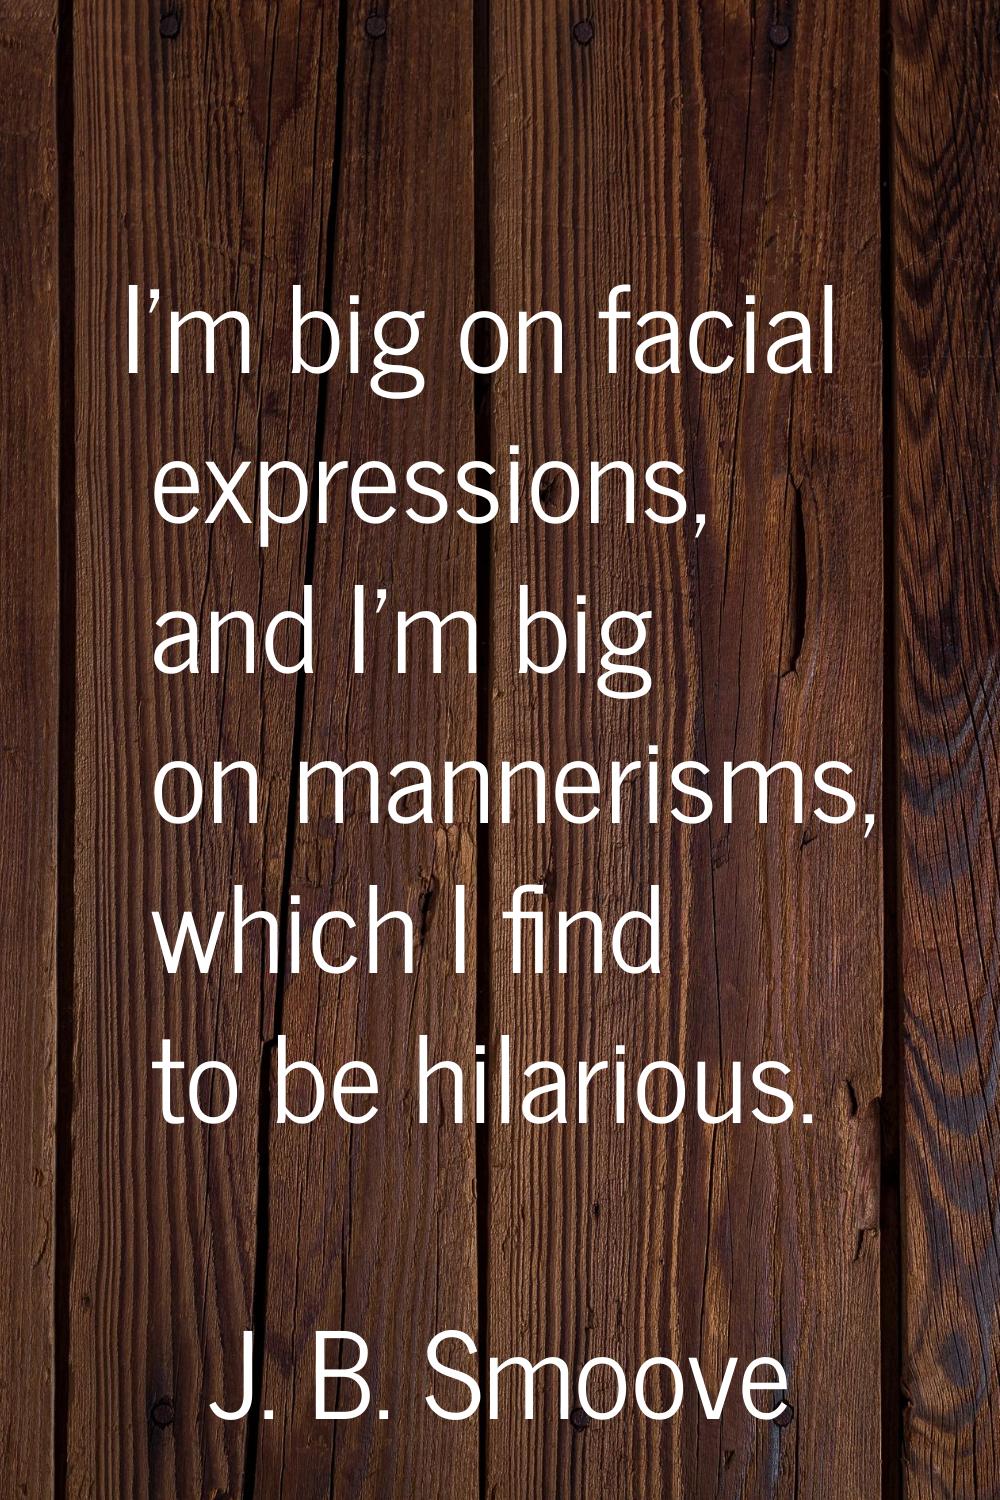 I'm big on facial expressions, and I'm big on mannerisms, which I find to be hilarious.